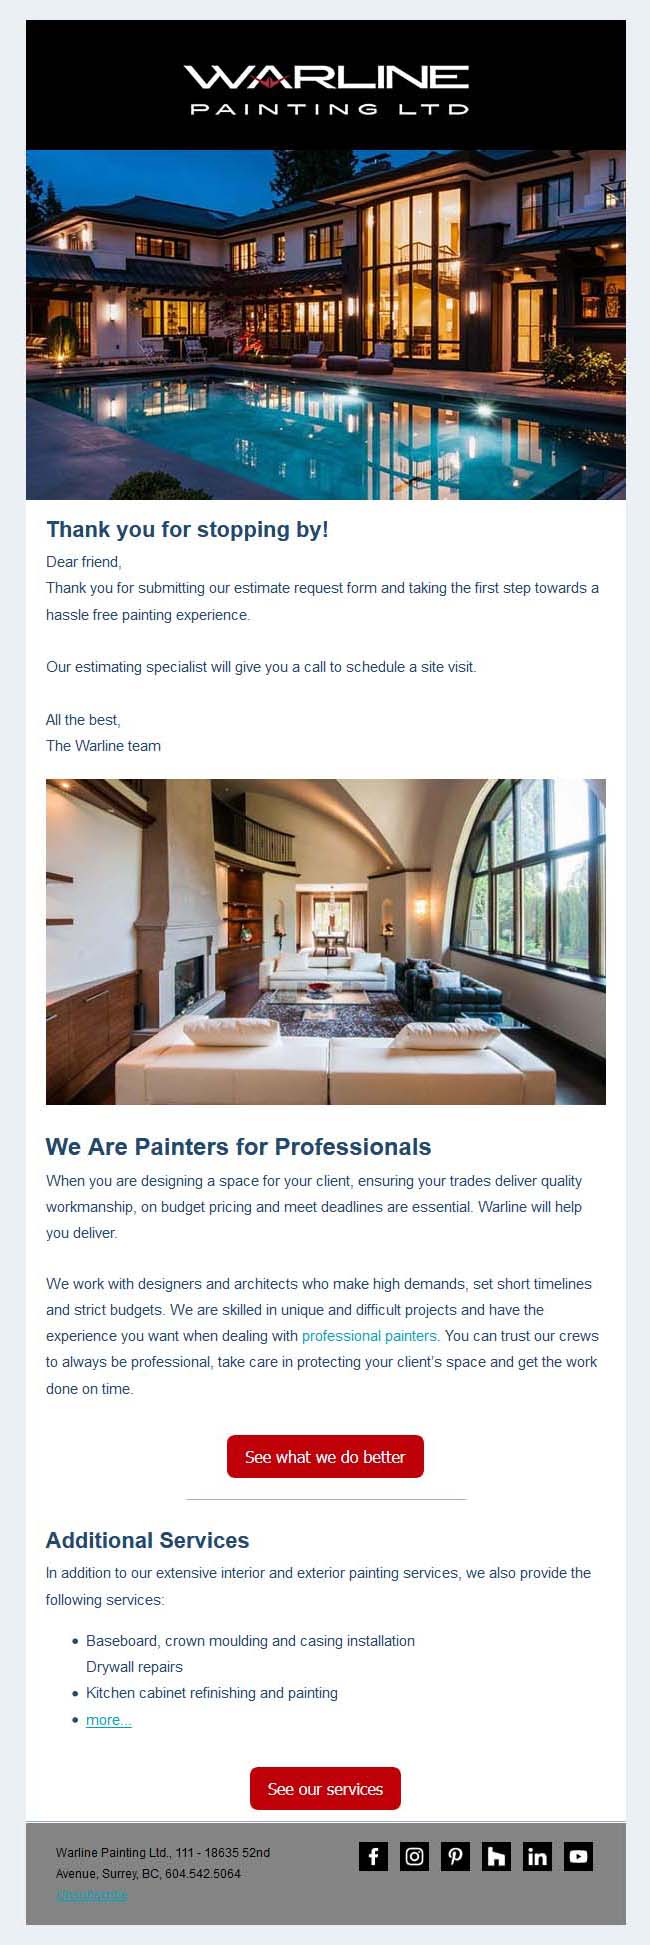 WarlinePainting-Email-BuildingPro-Thanks